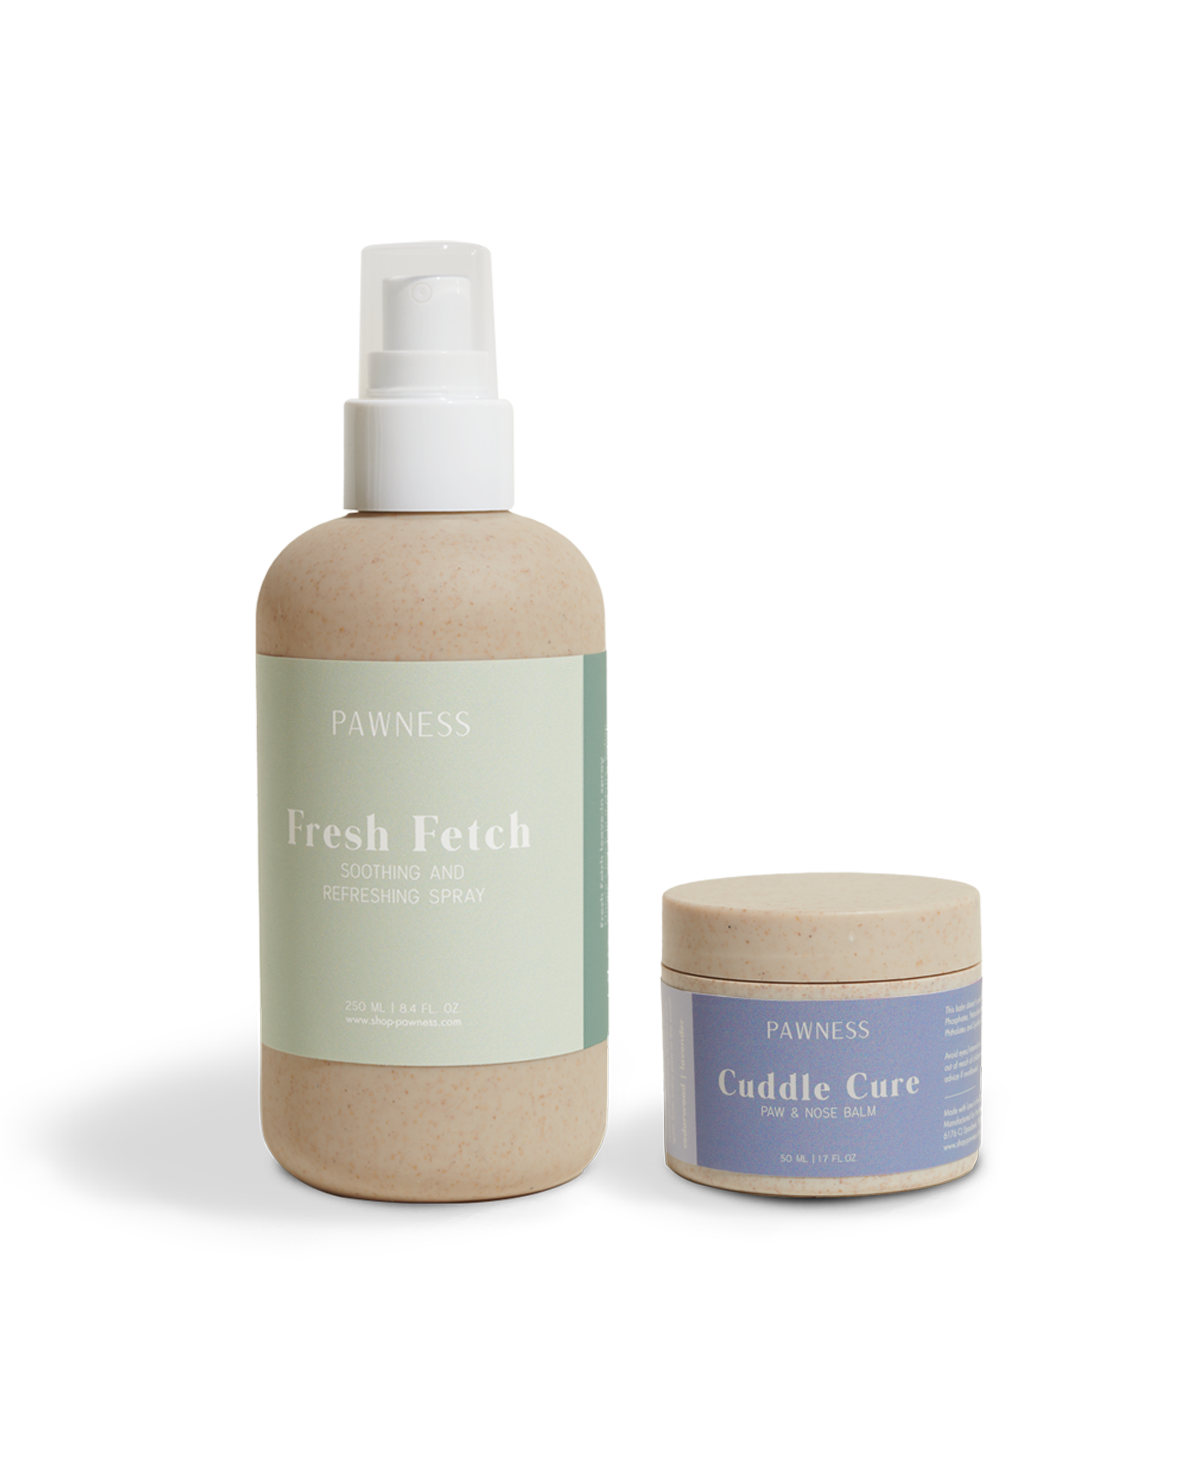 A photo of fresh Cuddle body wash and body butter, perfect for a luxurious and refreshing skincare routine.